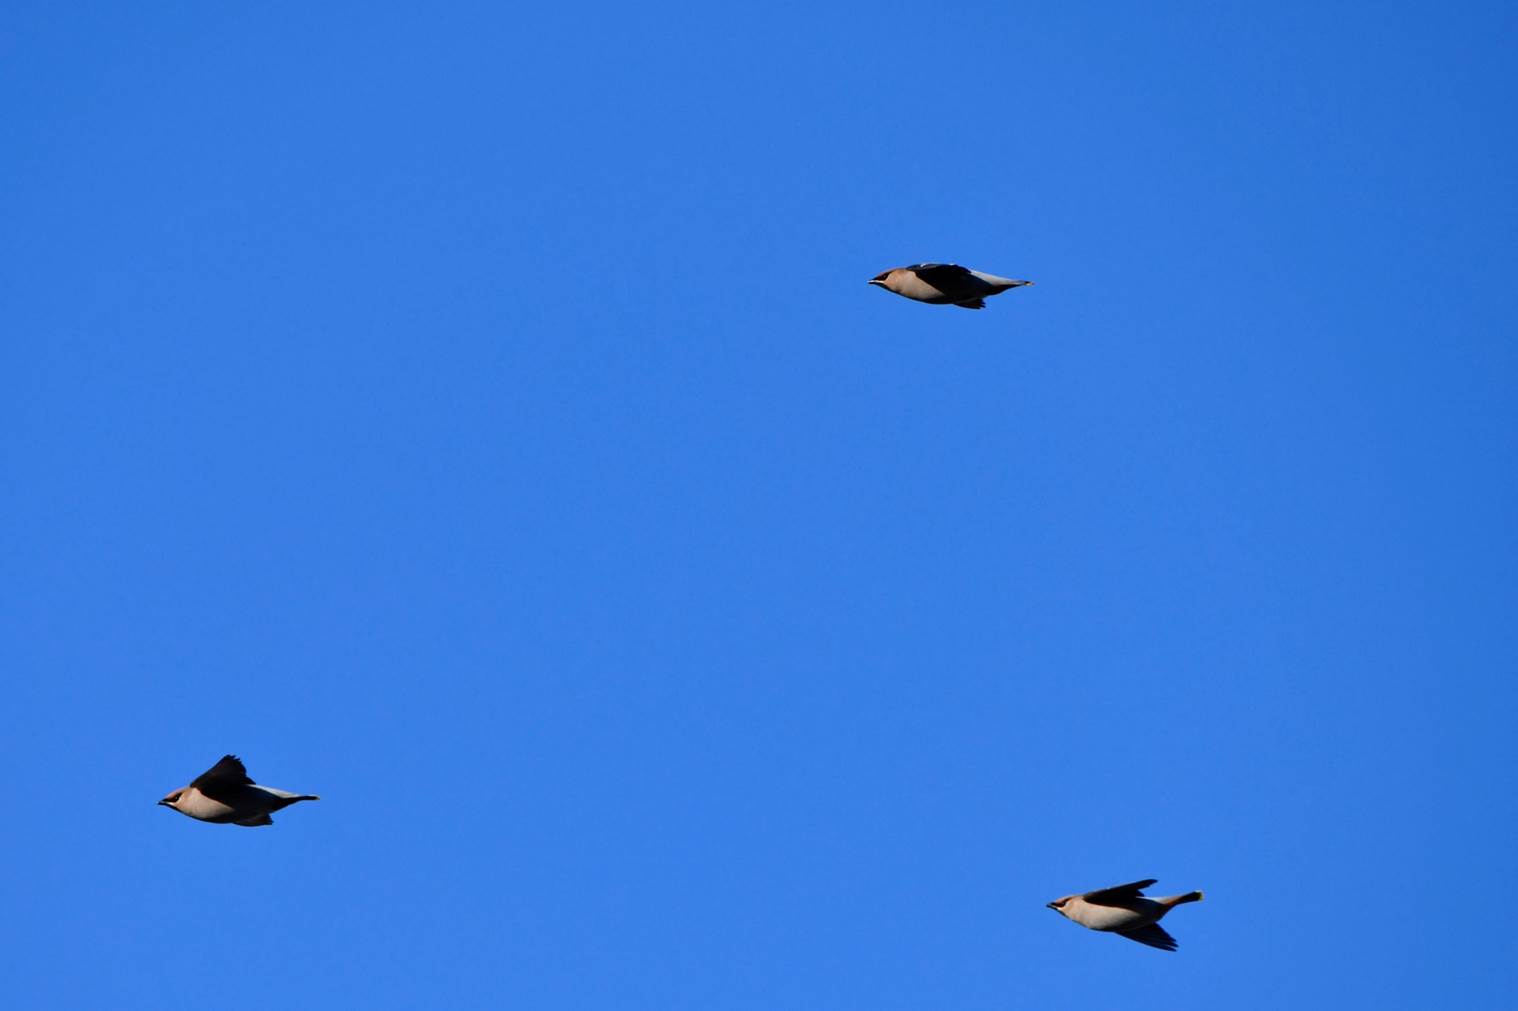 A group of birds flying in the sky

Description automatically generated